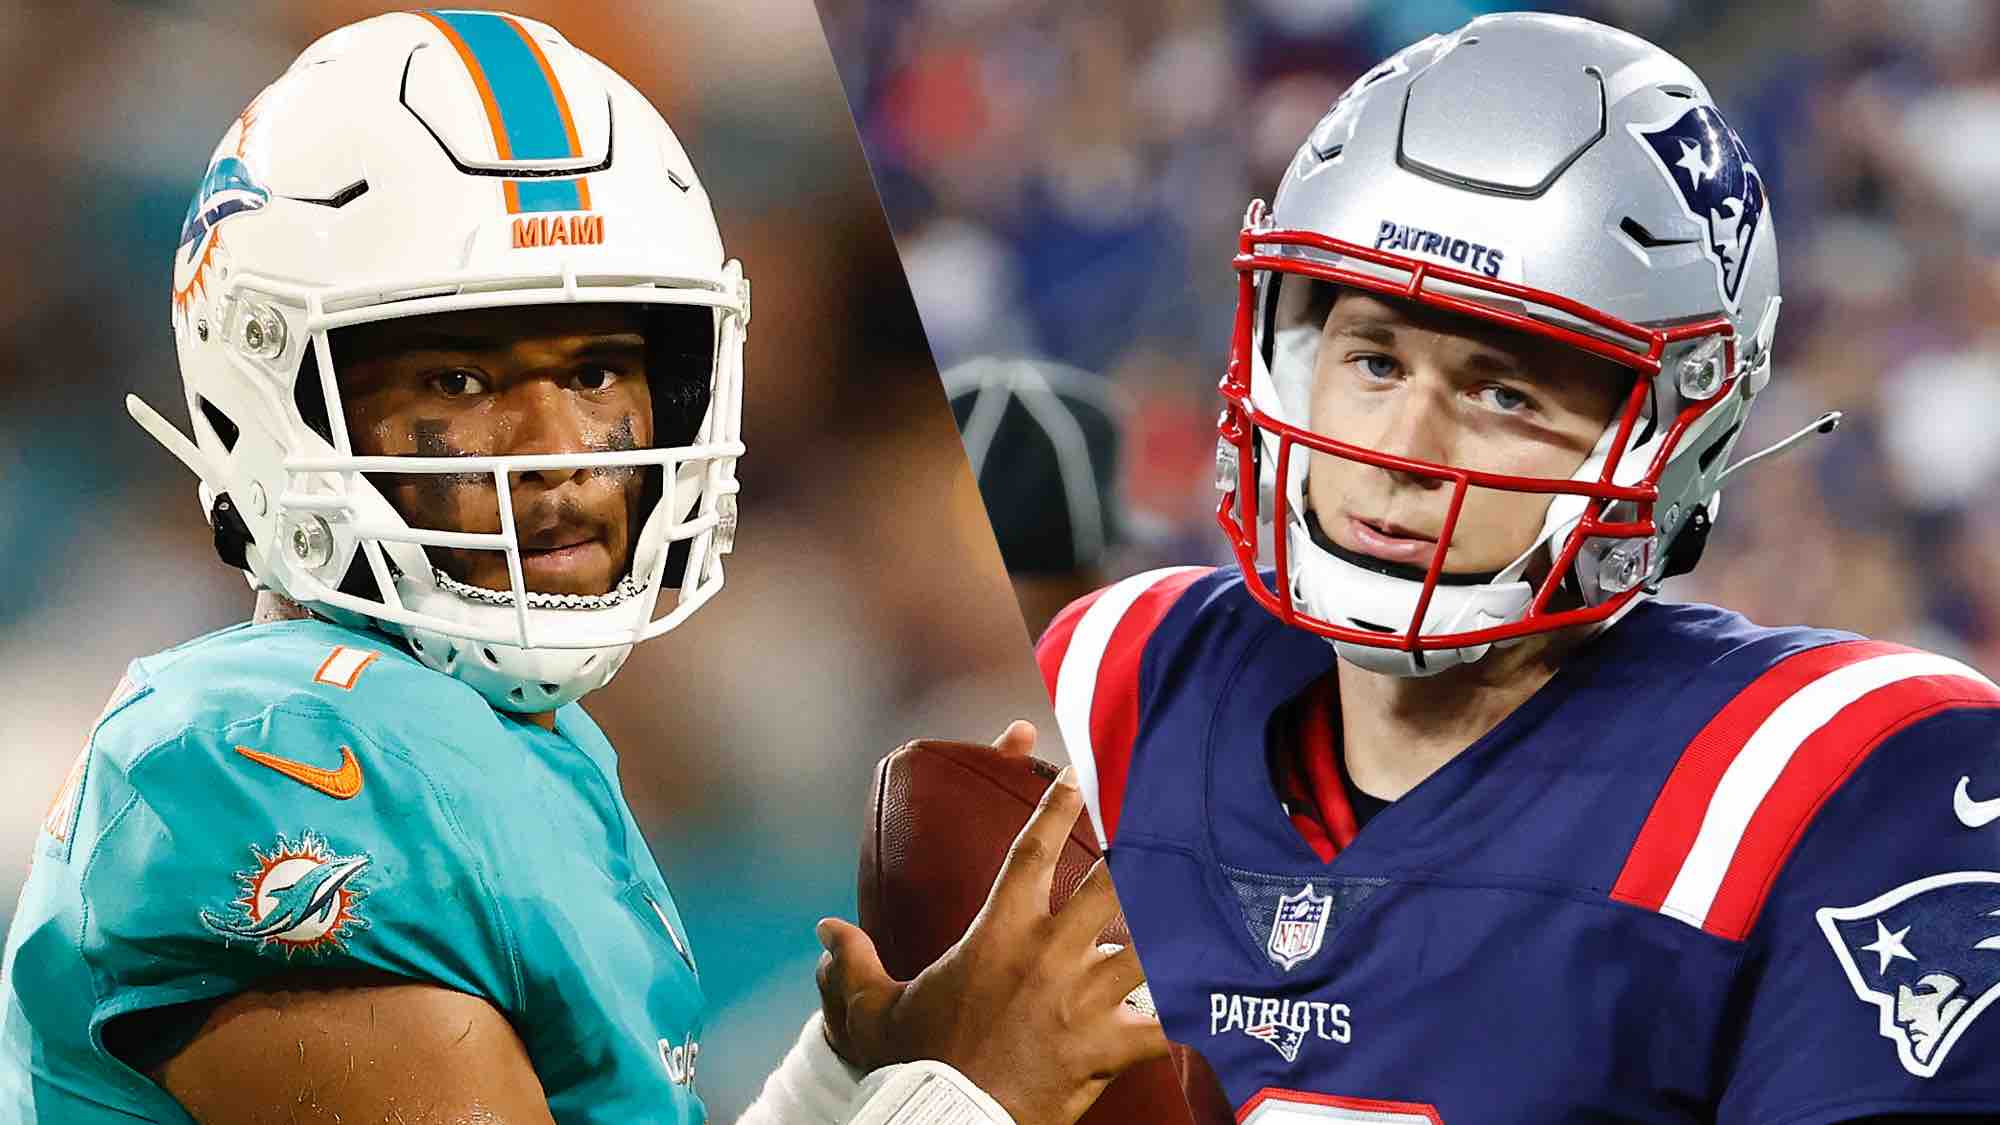 Dolphins vs Patriots live stream: How to watch NFL week 1 game online